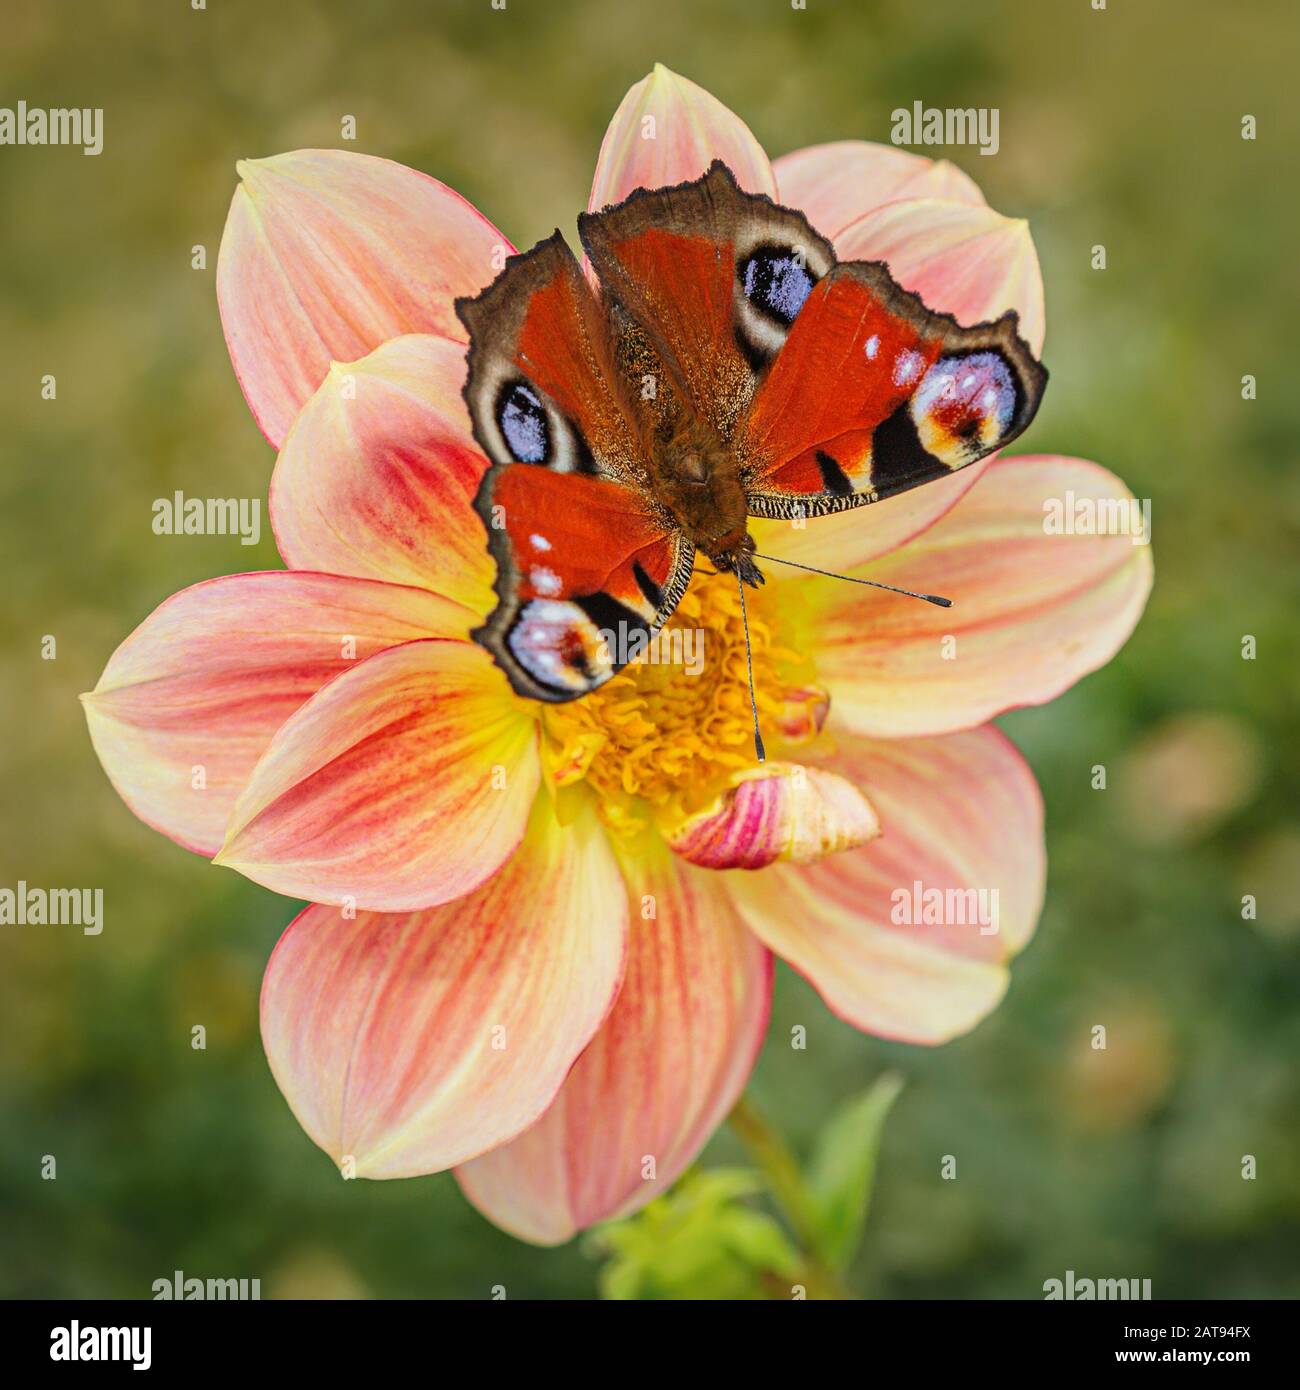 Colorful peacock butterfly sitting on pink and yellow dahlia flower growing in a garden on a summer day. Blurred green background. Stock Photo